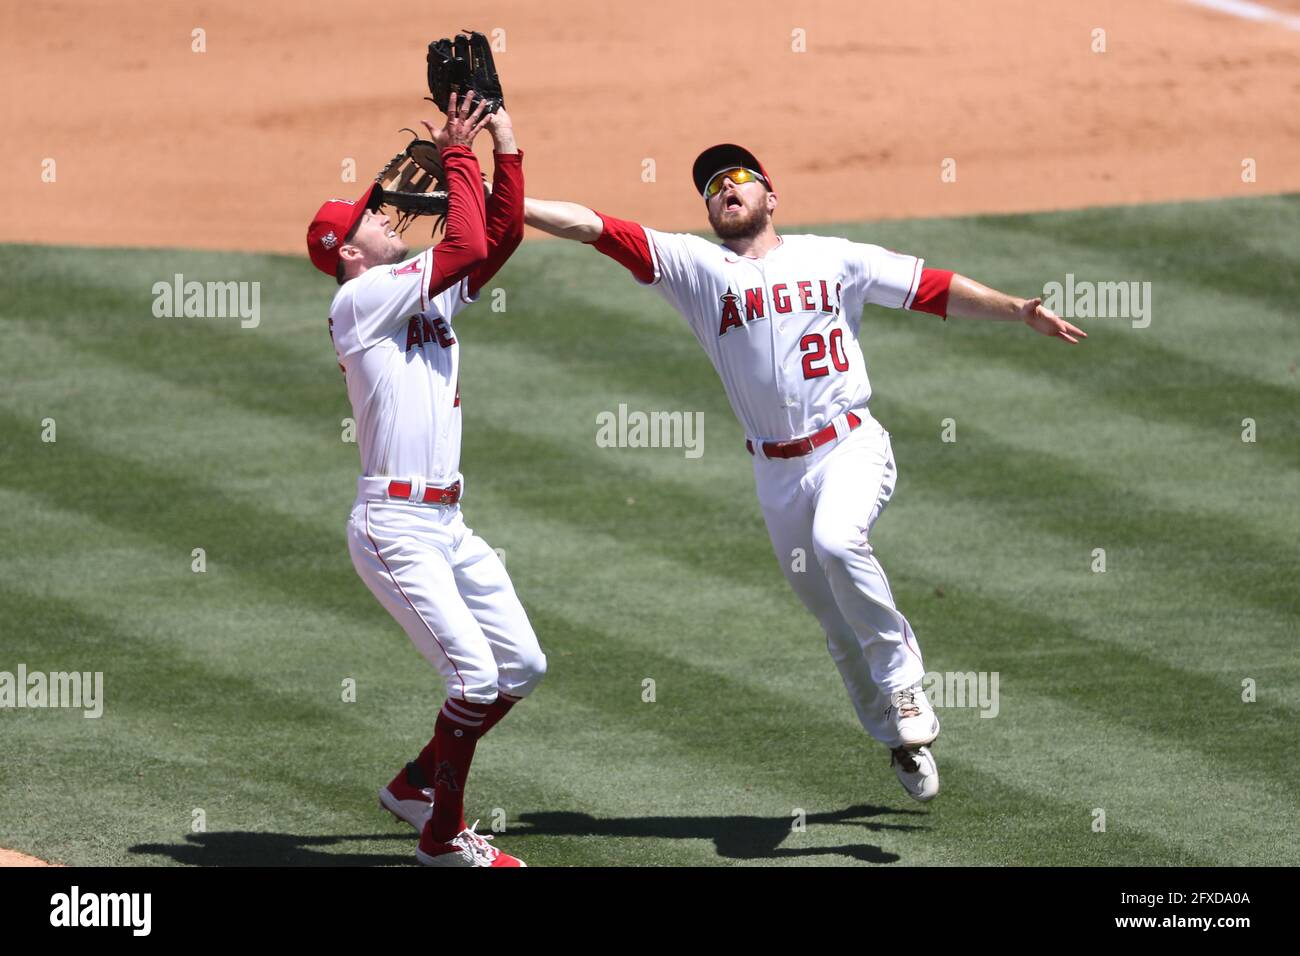 May 26, 2021: Los Angeles Angels first baseman Jared Walsh (20) and Los Angeles Angels starting pitcher Griffin Canning (47) almost collide trying to catch an infield fly during the game between the Texas Rangers and the Los Angeles Angels of Anaheim at Angel Stadium in Anaheim, CA, (Photo by Peter Joneleit, Cal Sport Media) Stock Photo